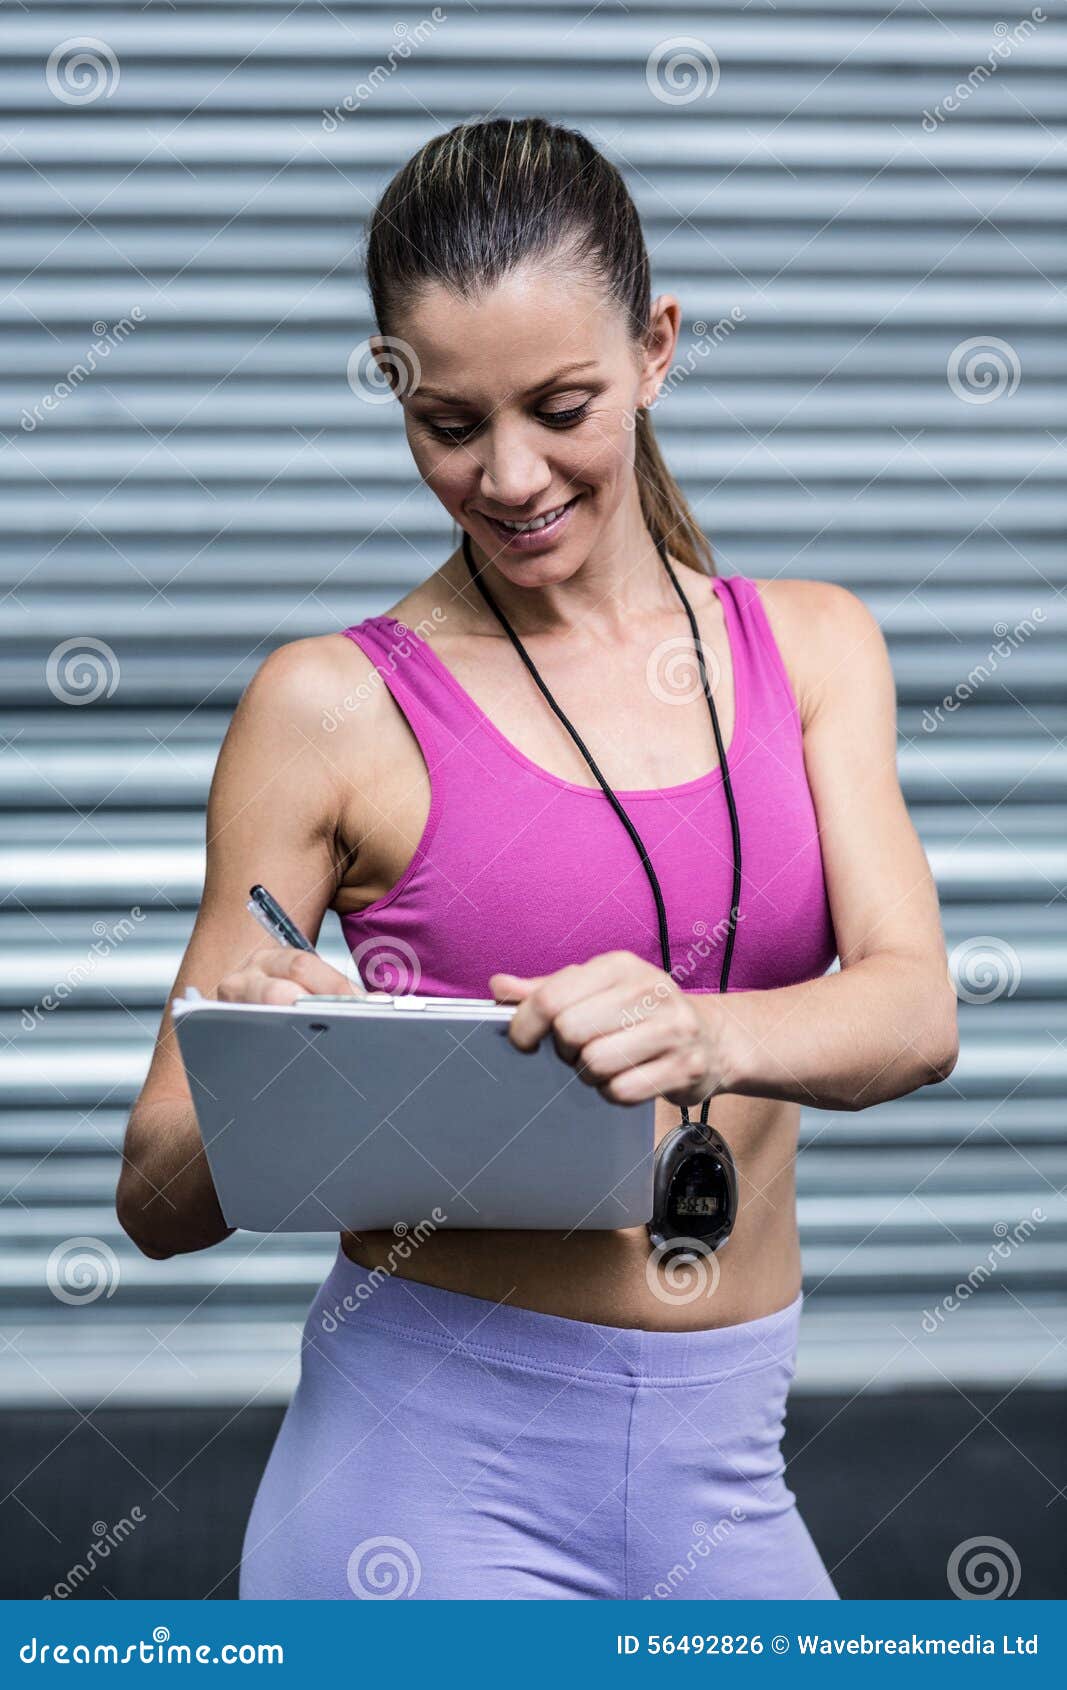 A Female Coach Writing on Her Clipboard Stock Photo - Image of ...